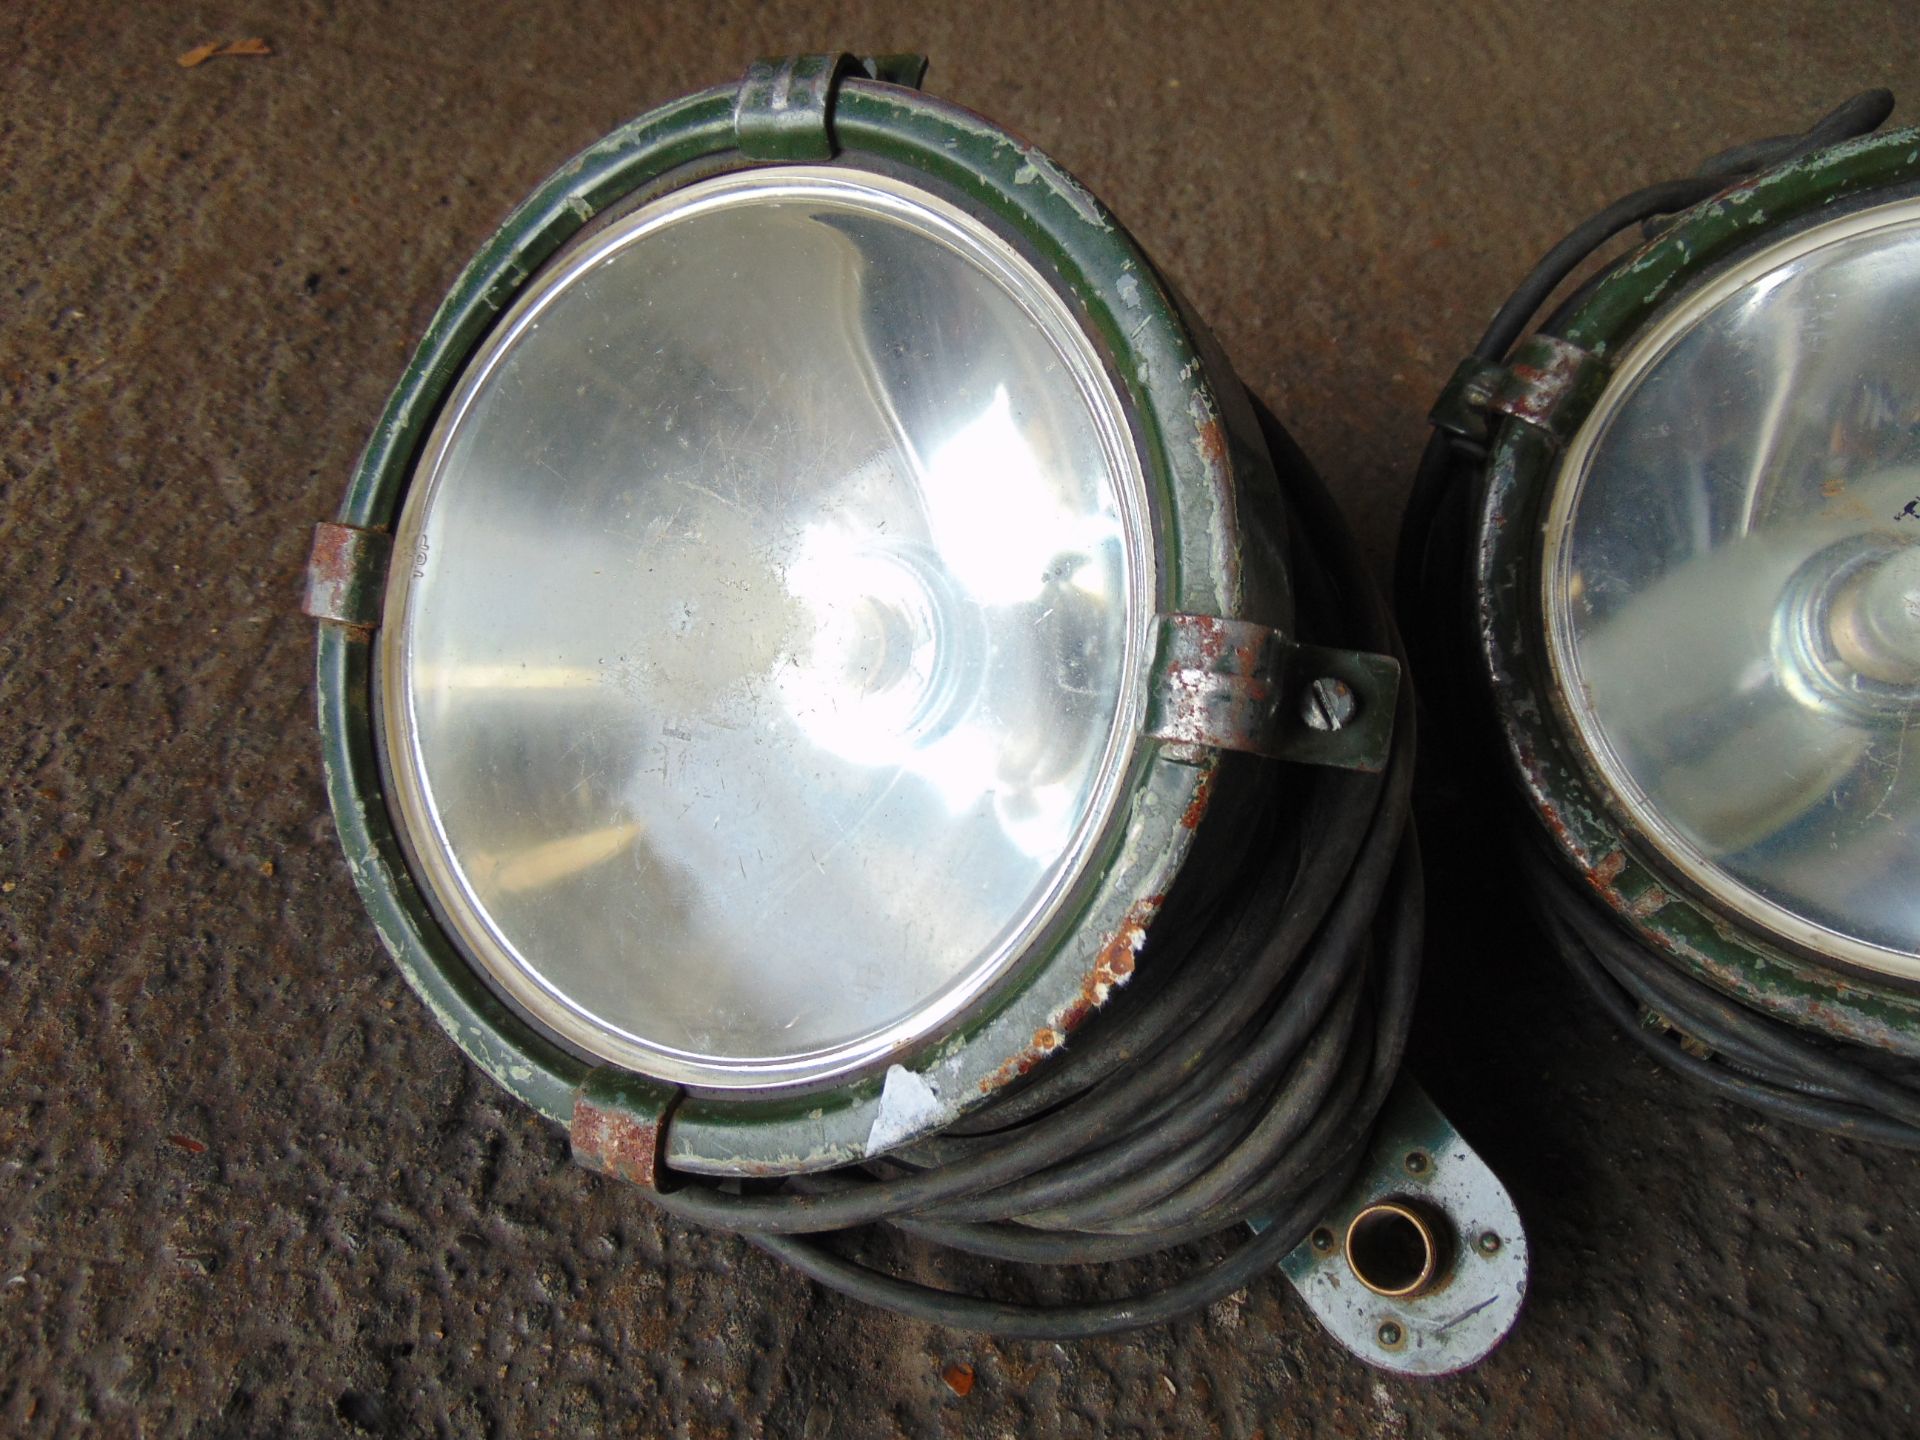 2 x AFV Vehicle Search Lamps - Image 2 of 4